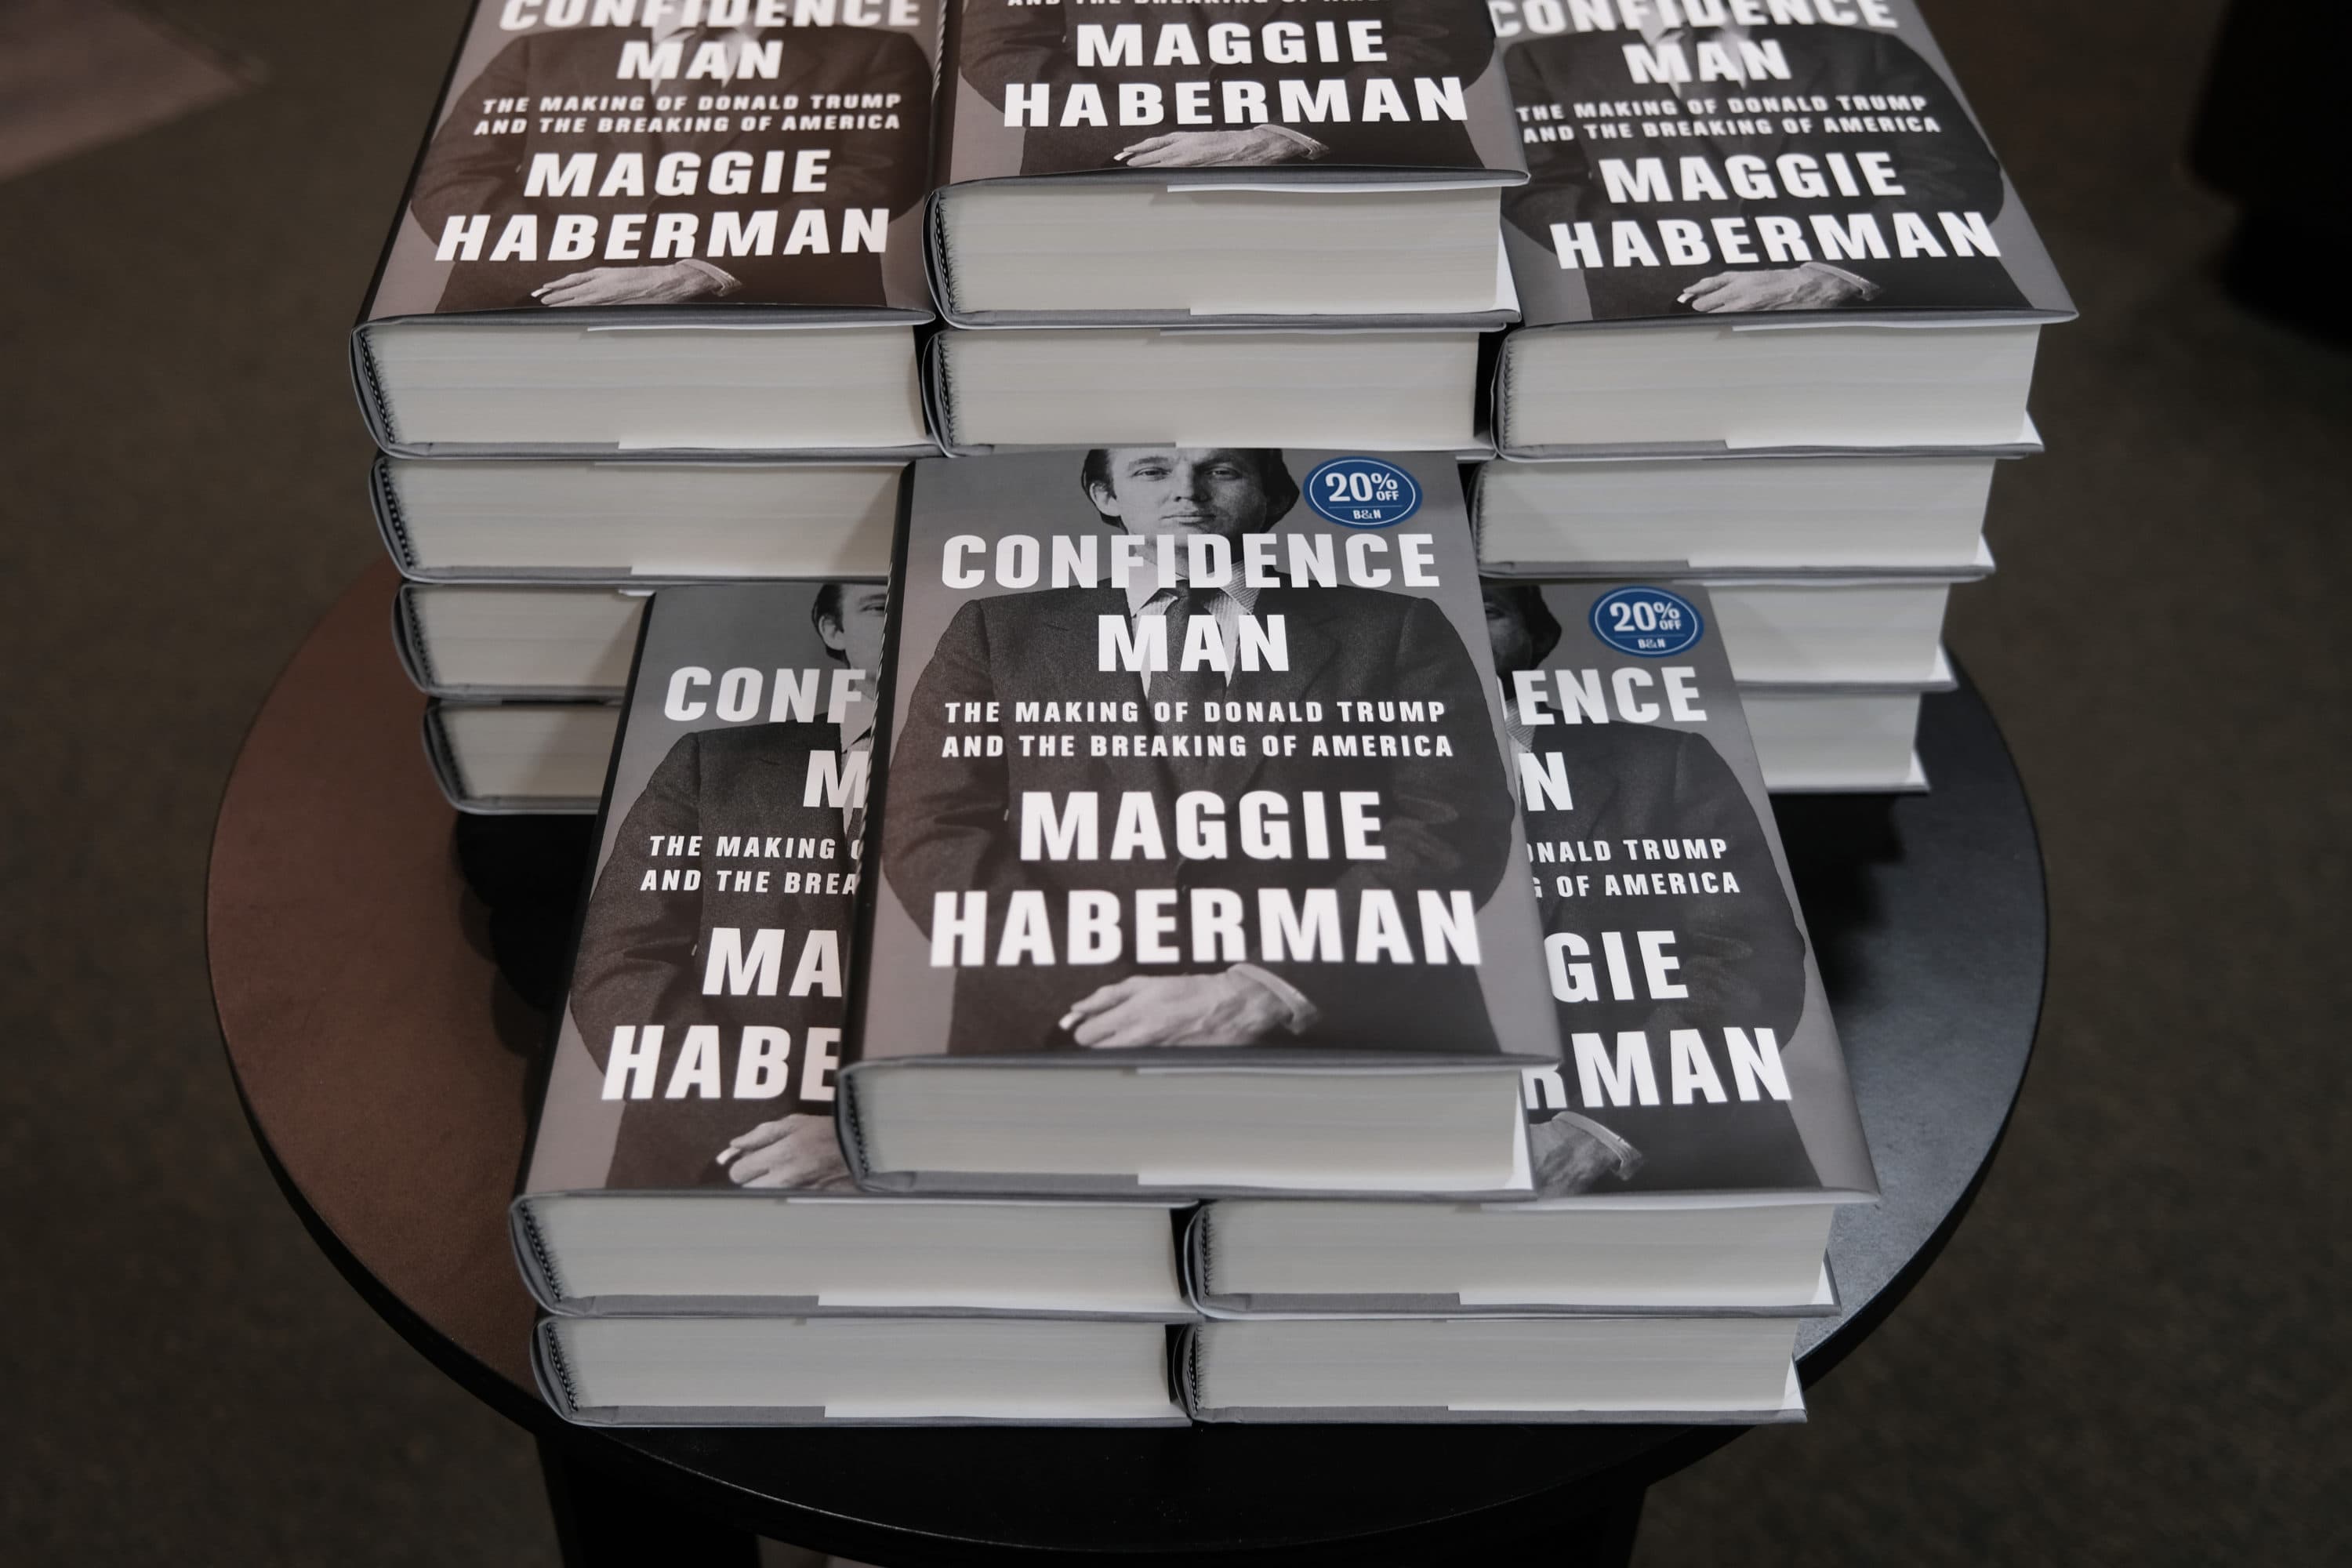 A new book on Donald Trump by New York Times journalist Maggie Haberman is displayed at a Manhattan bookstore. (Spencer Platt/Getty Images)